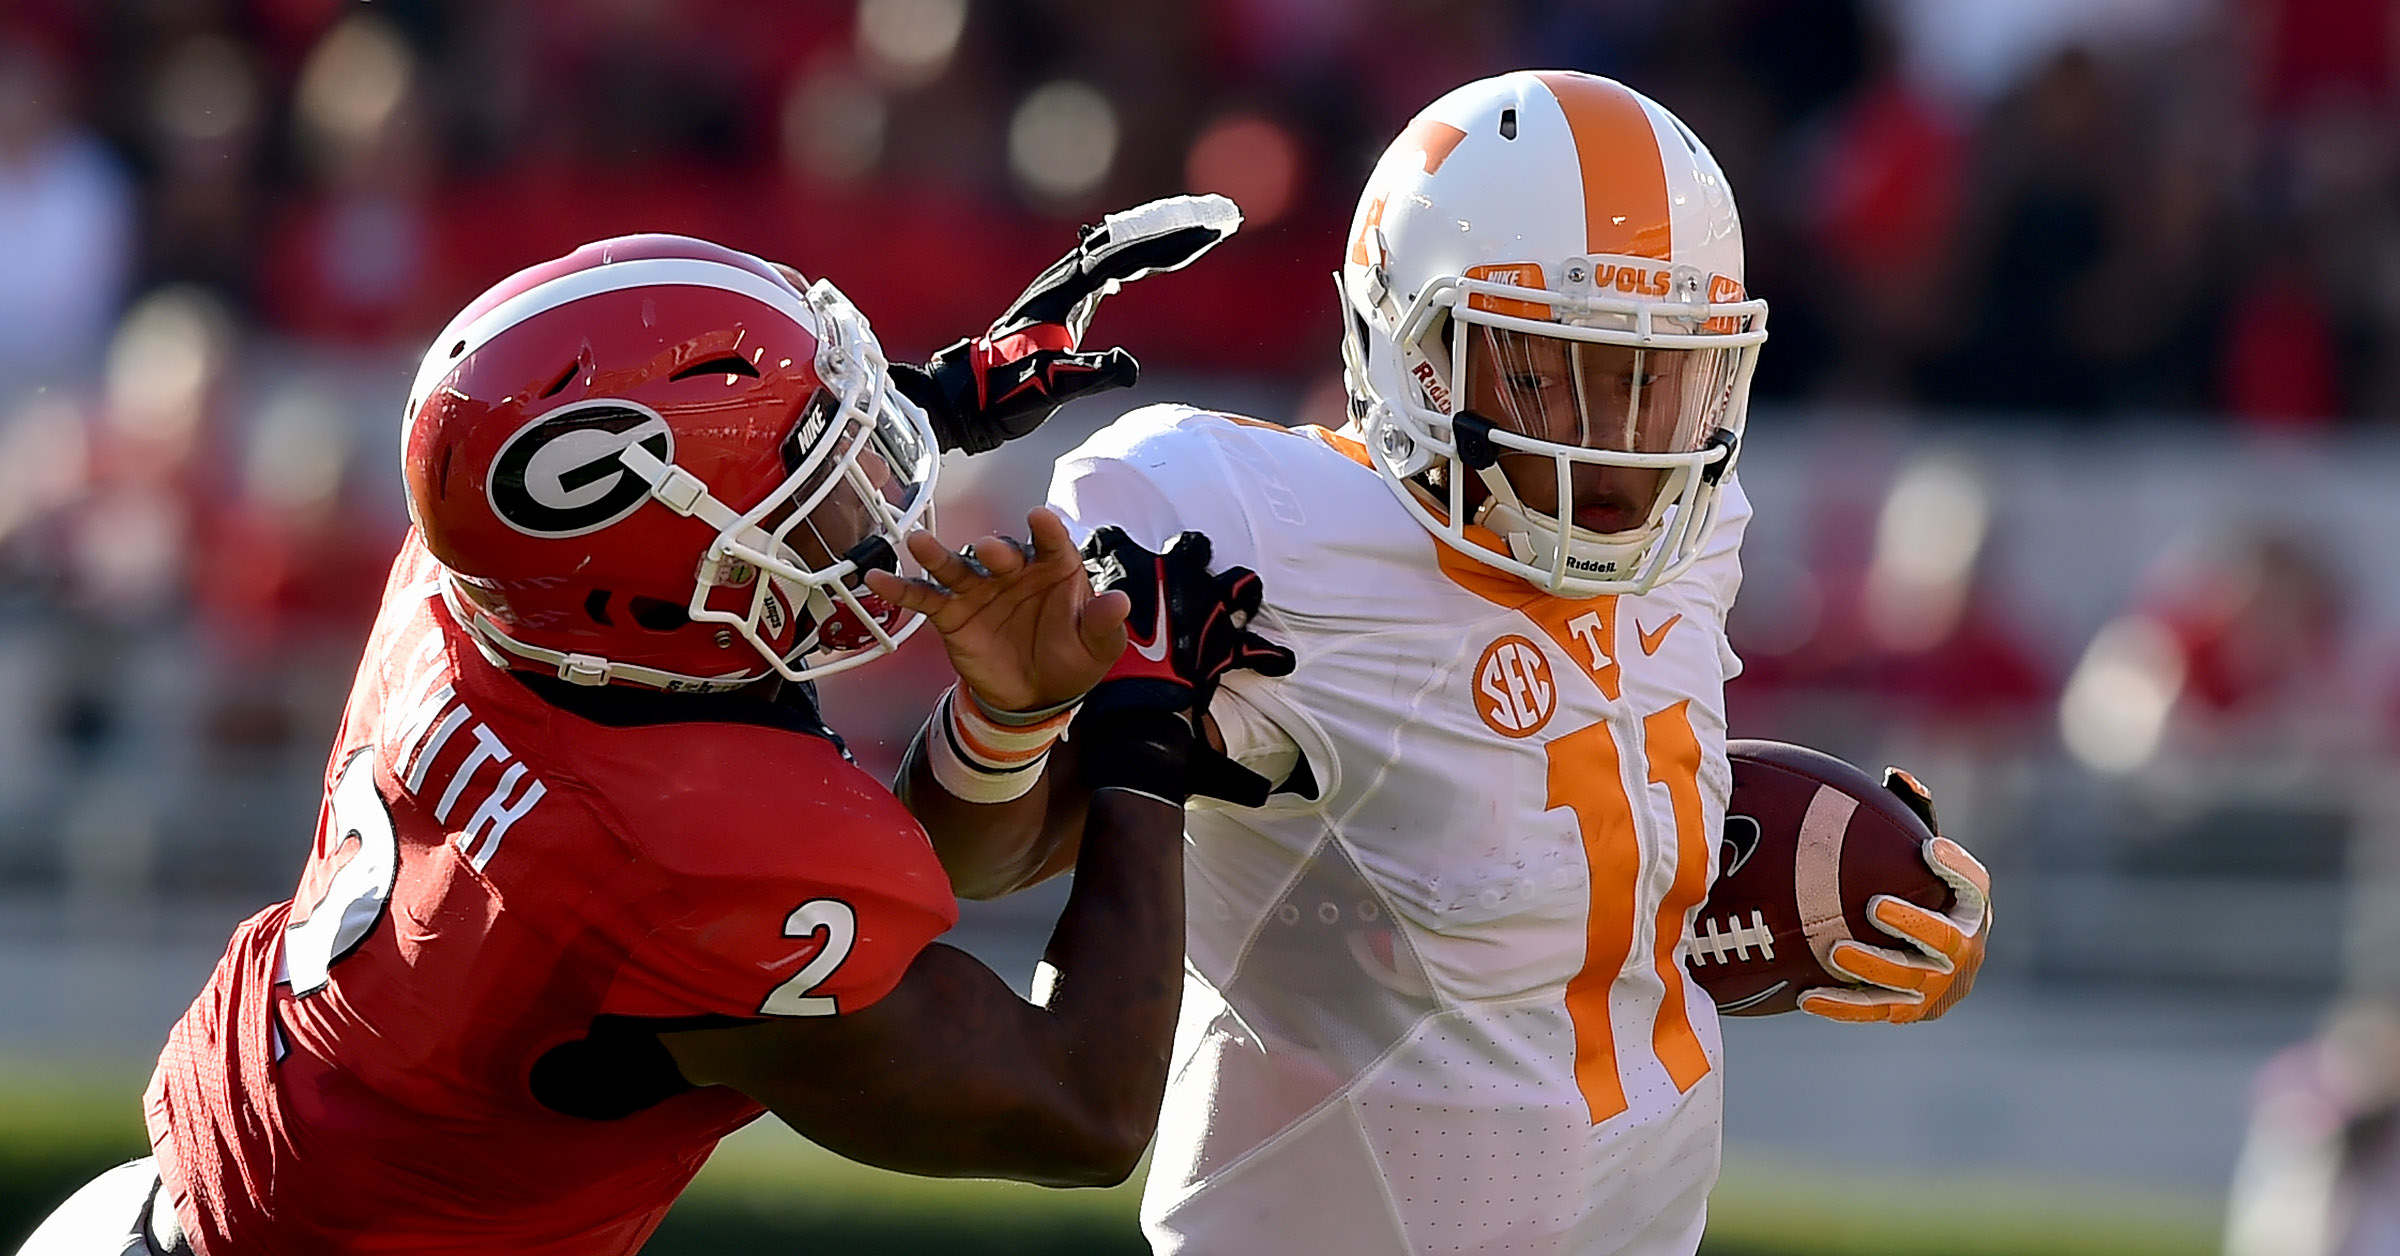 Tennessee quarterback Joshua Dobbs scrambles from Georgia Bulldogs defensive back Maurice Smith during a 2016 NCAA college football game. Photo courtesy of Brant Sanderlin, The Atlanta Journal Constitution.